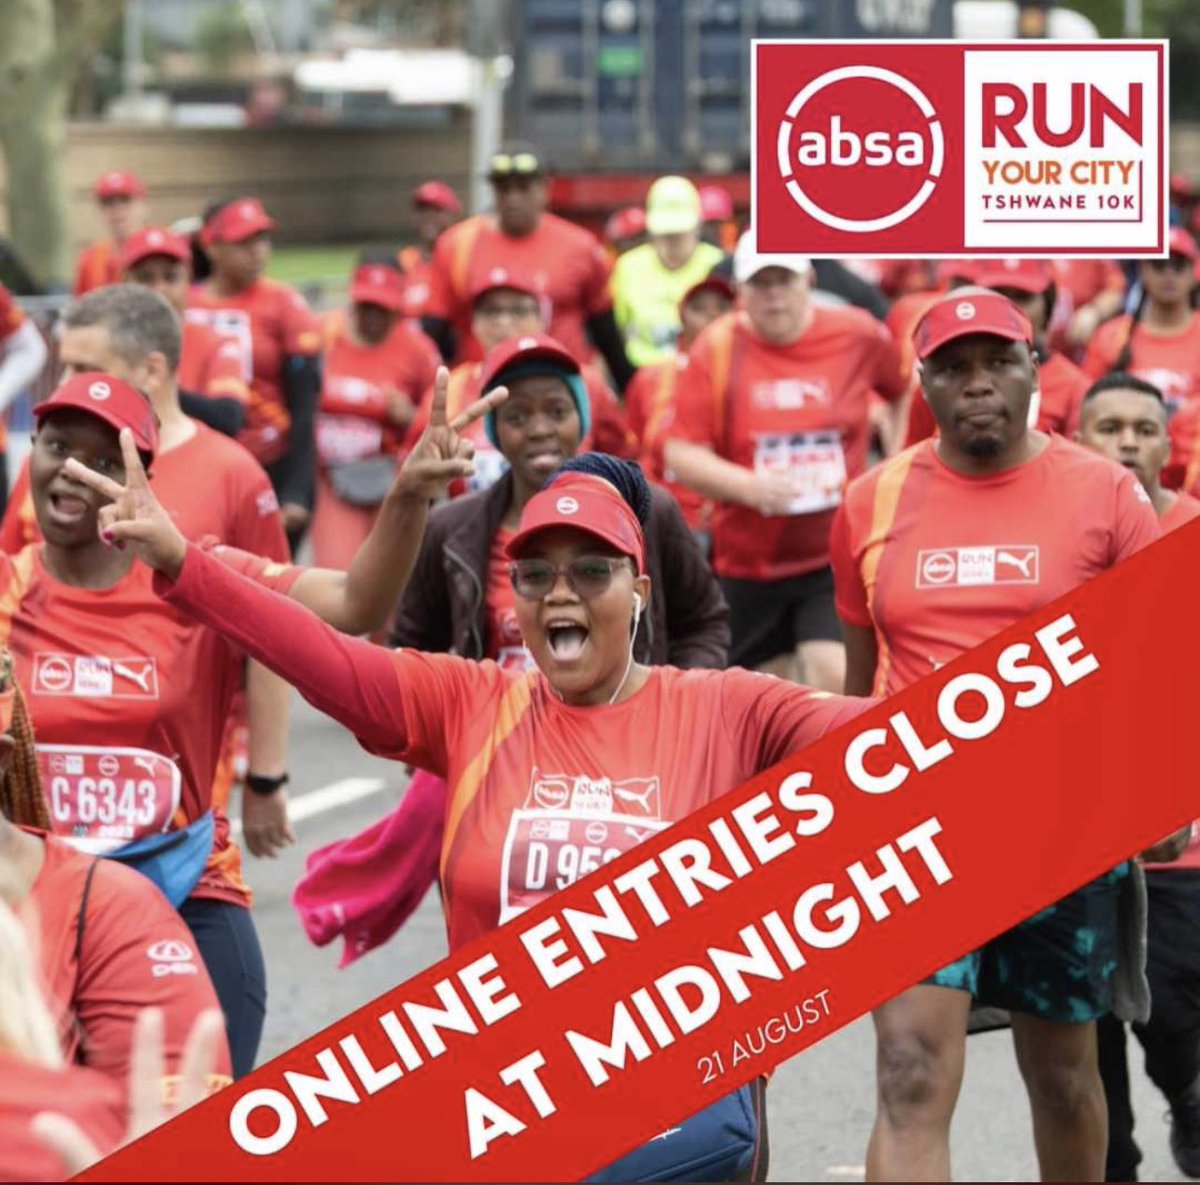 Please get your entries by midnight and come run the sub60 bus with myself and @cherrie_e_fit 💕🫶🏾 #puma #pumanitro #absa #tcity #tshwane10k #AbsaRunYourCity